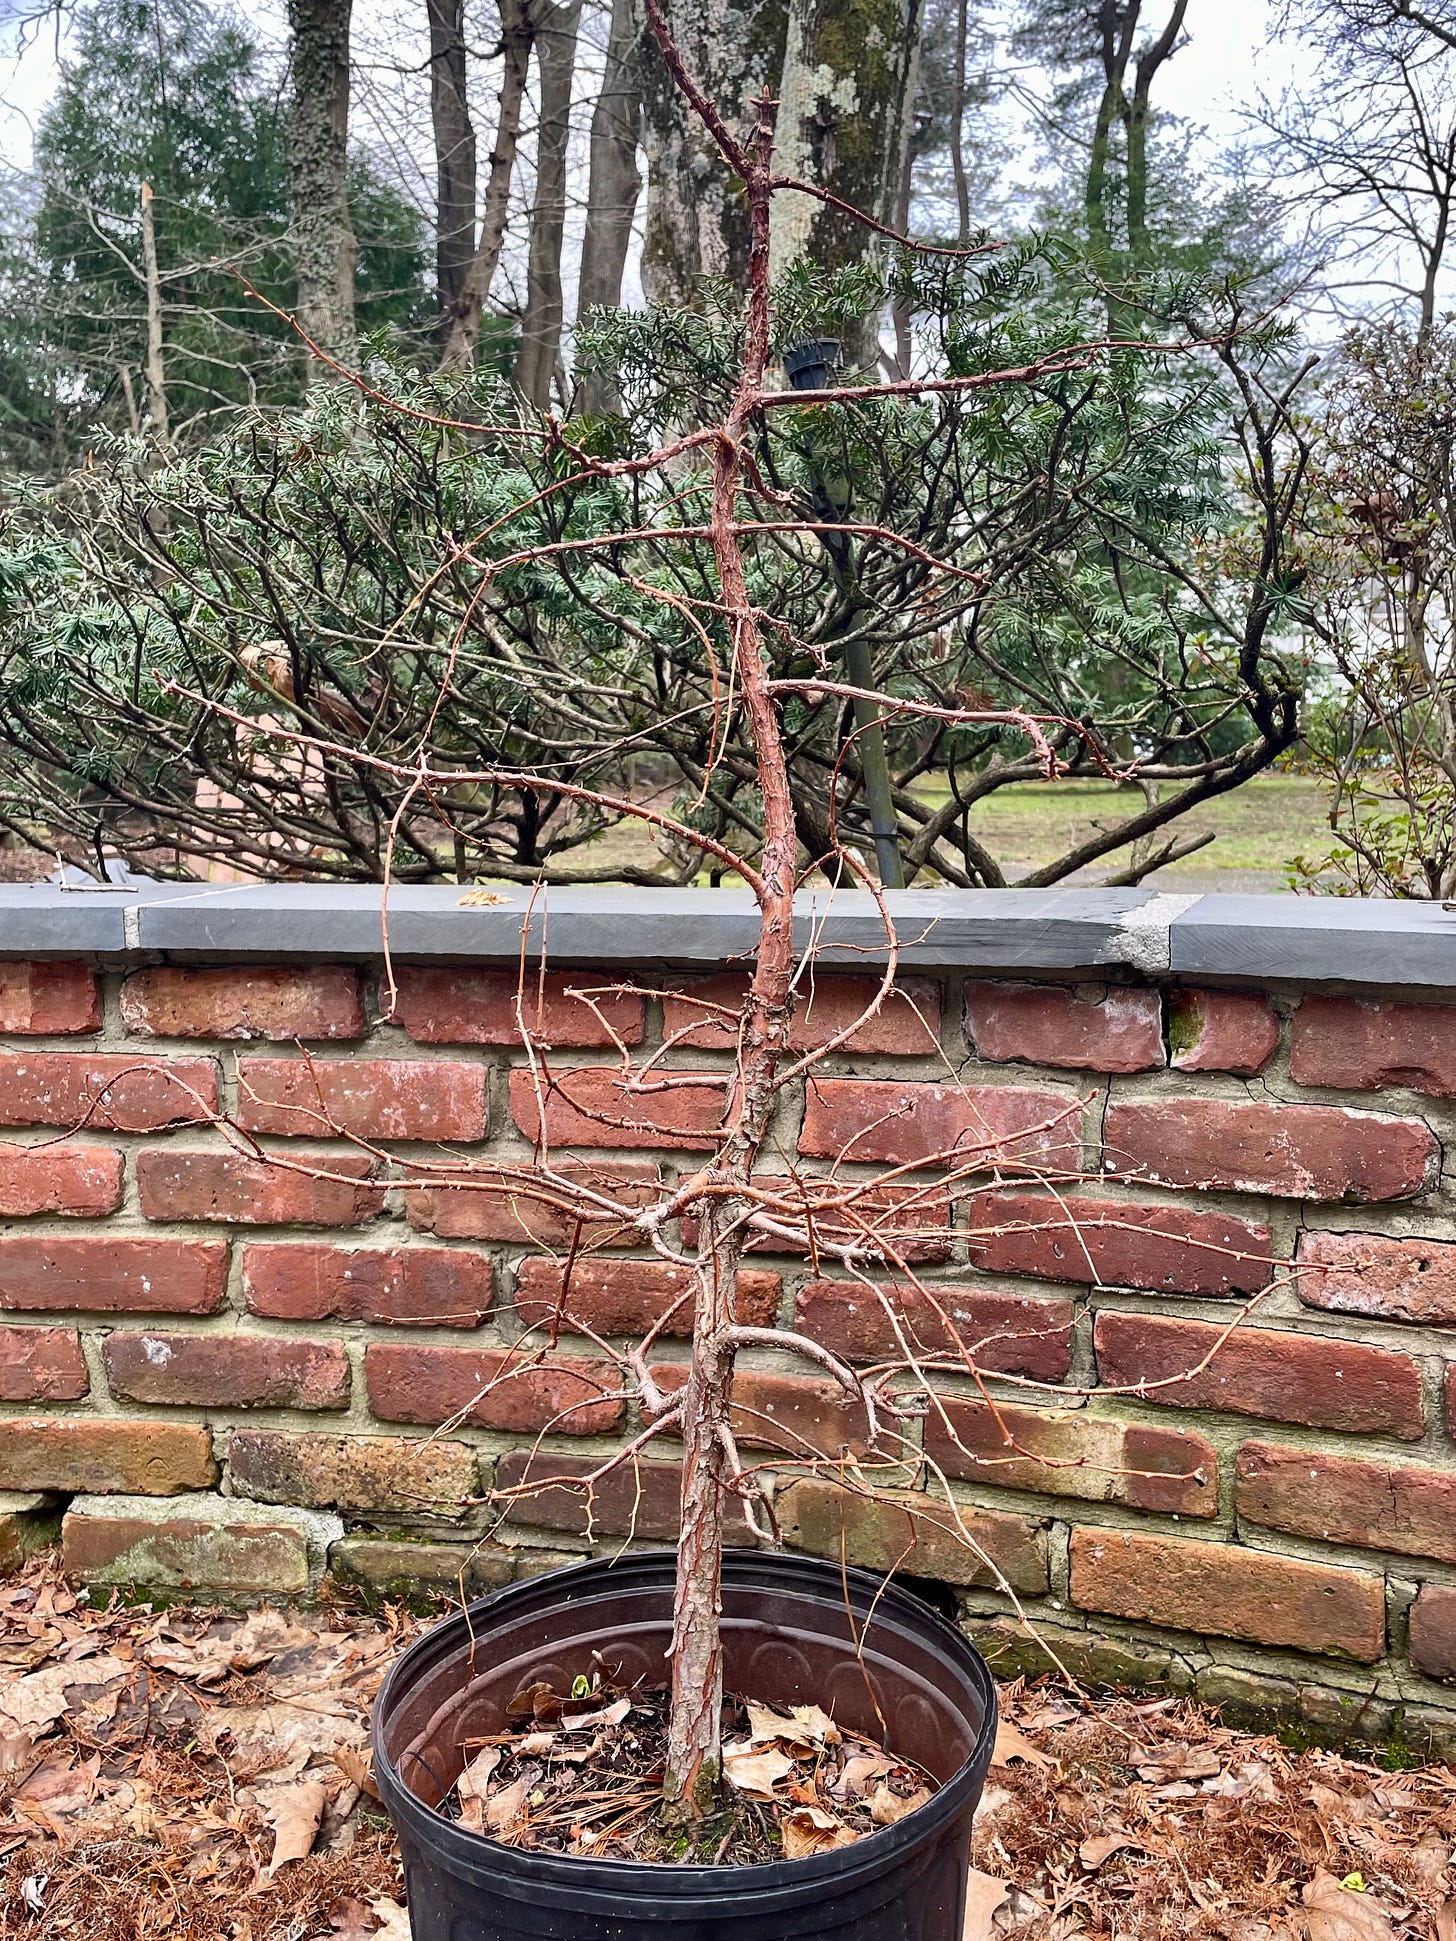 ID: Head on photo of the dawn redwood tree with bare gnarled branches.